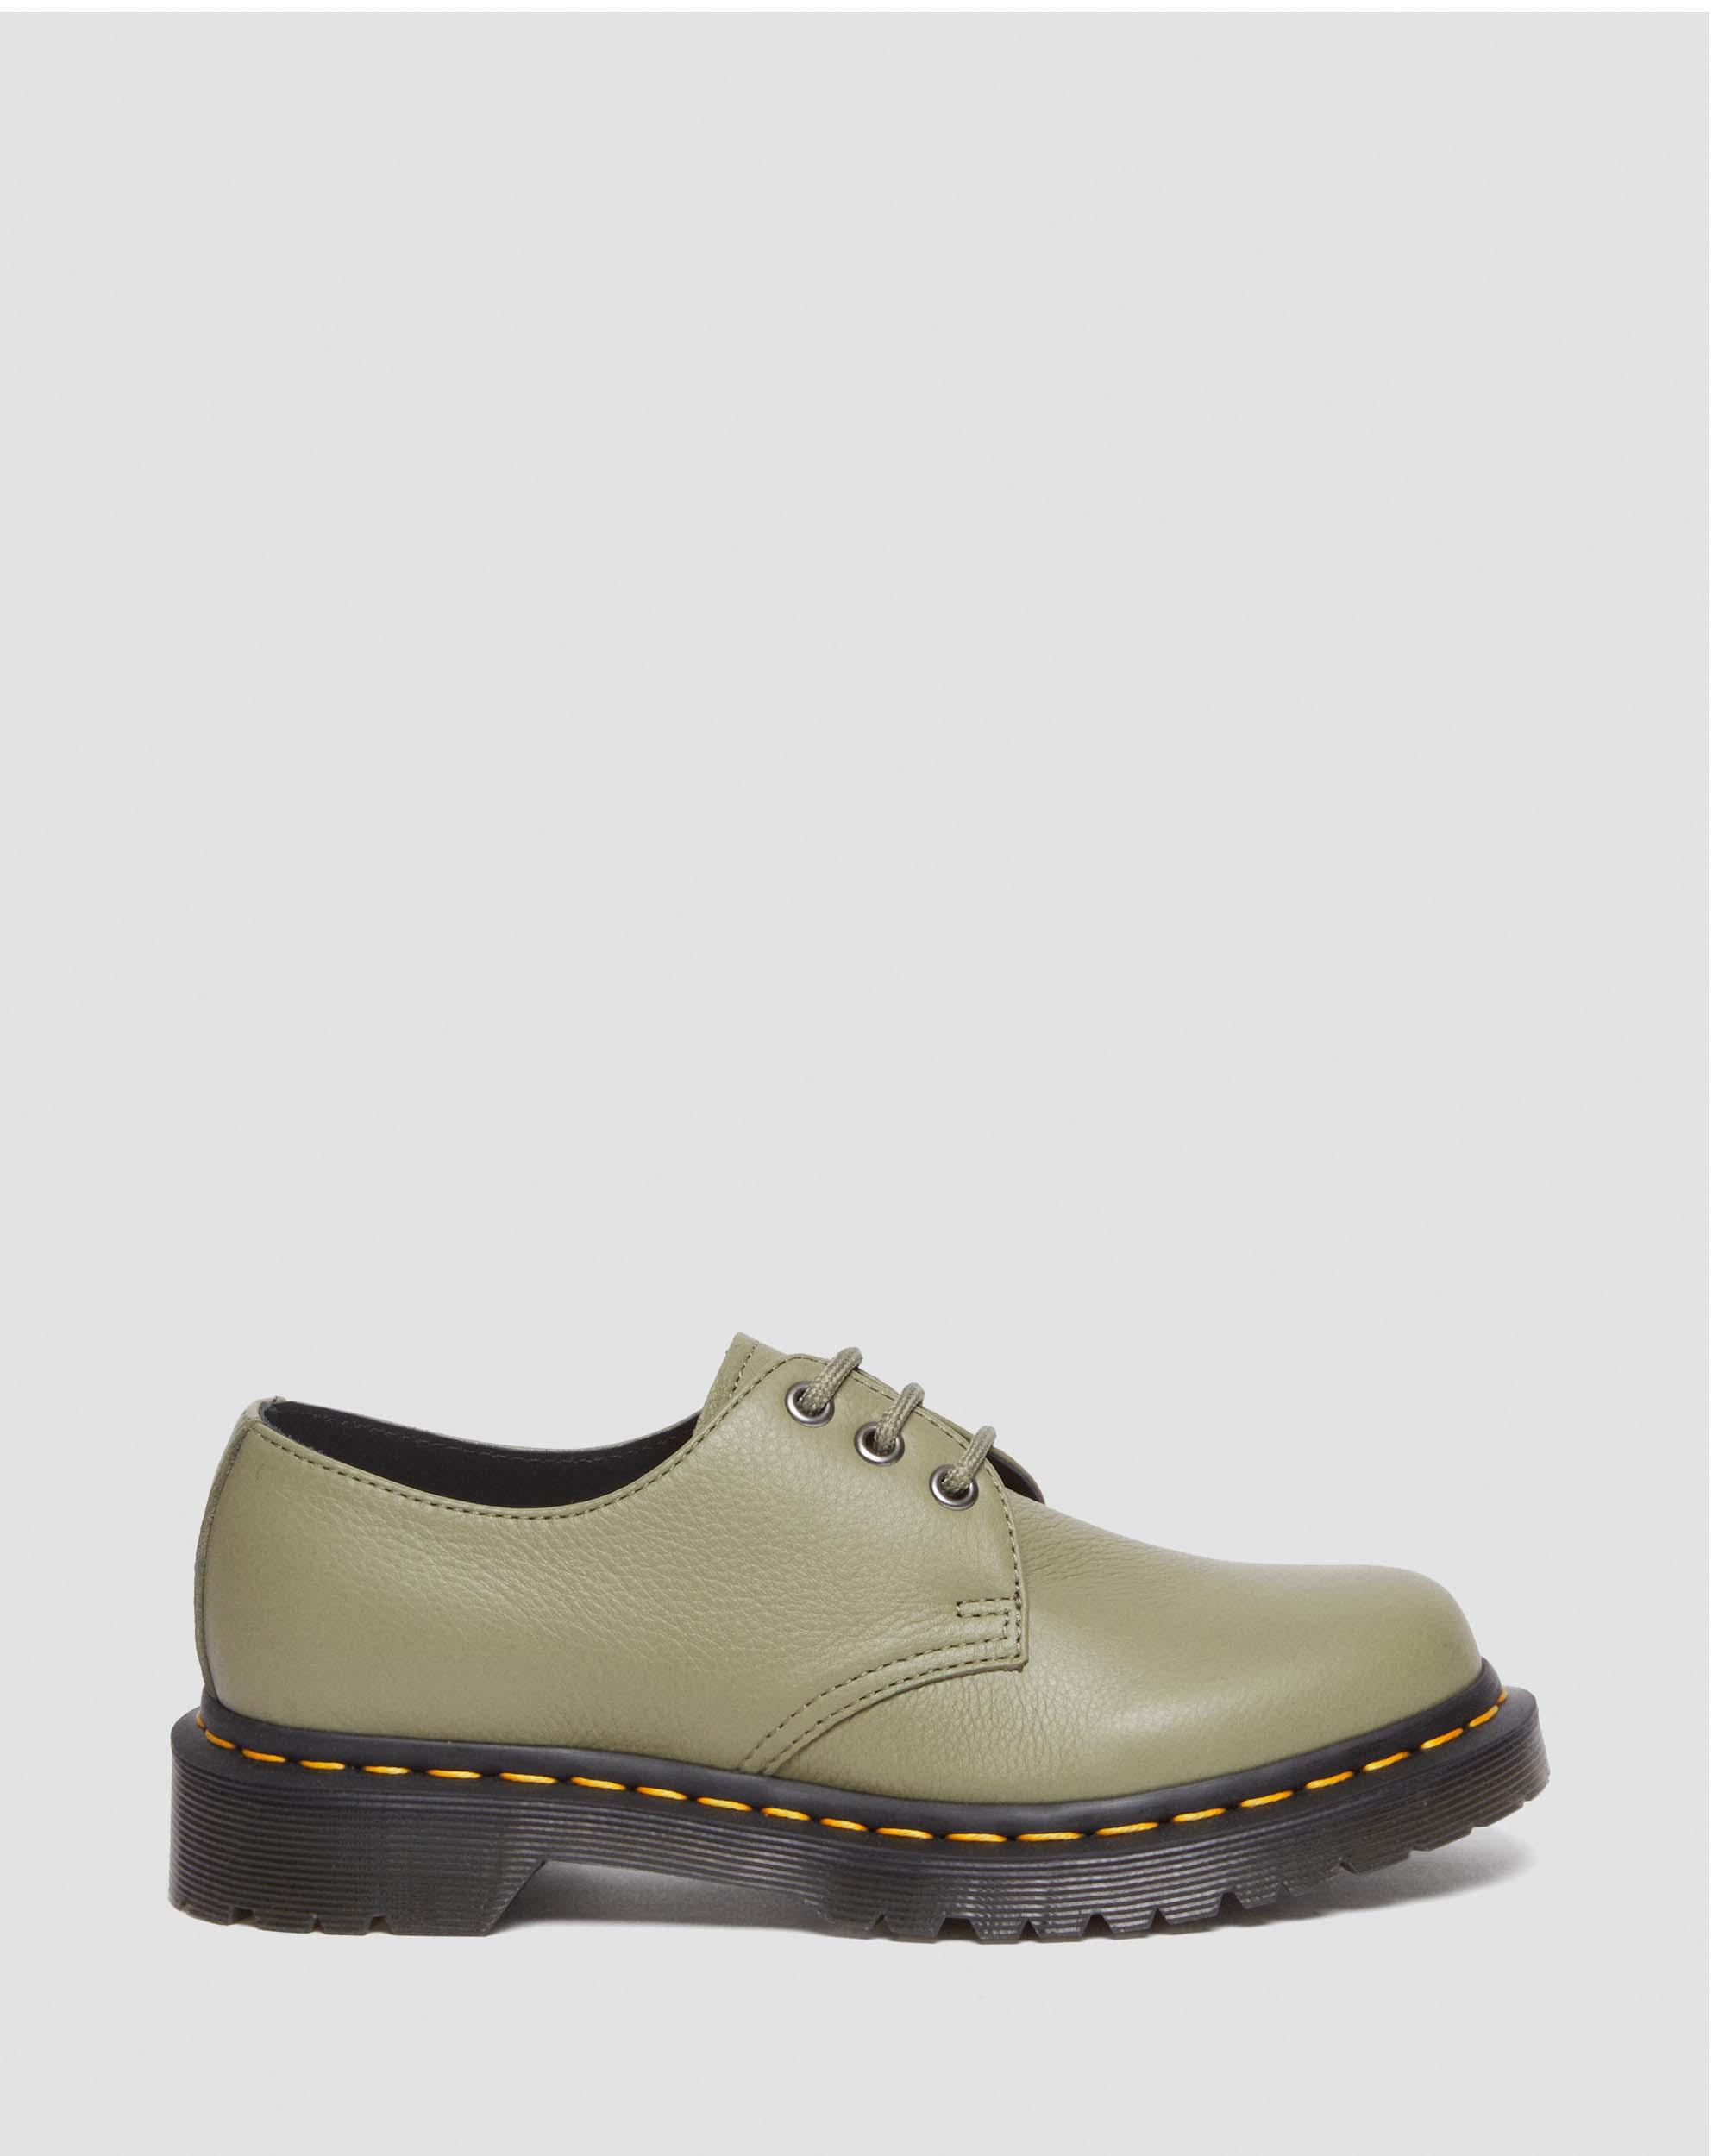 1461 Women's Virginia Leather Oxford Shoes in Muted Olive